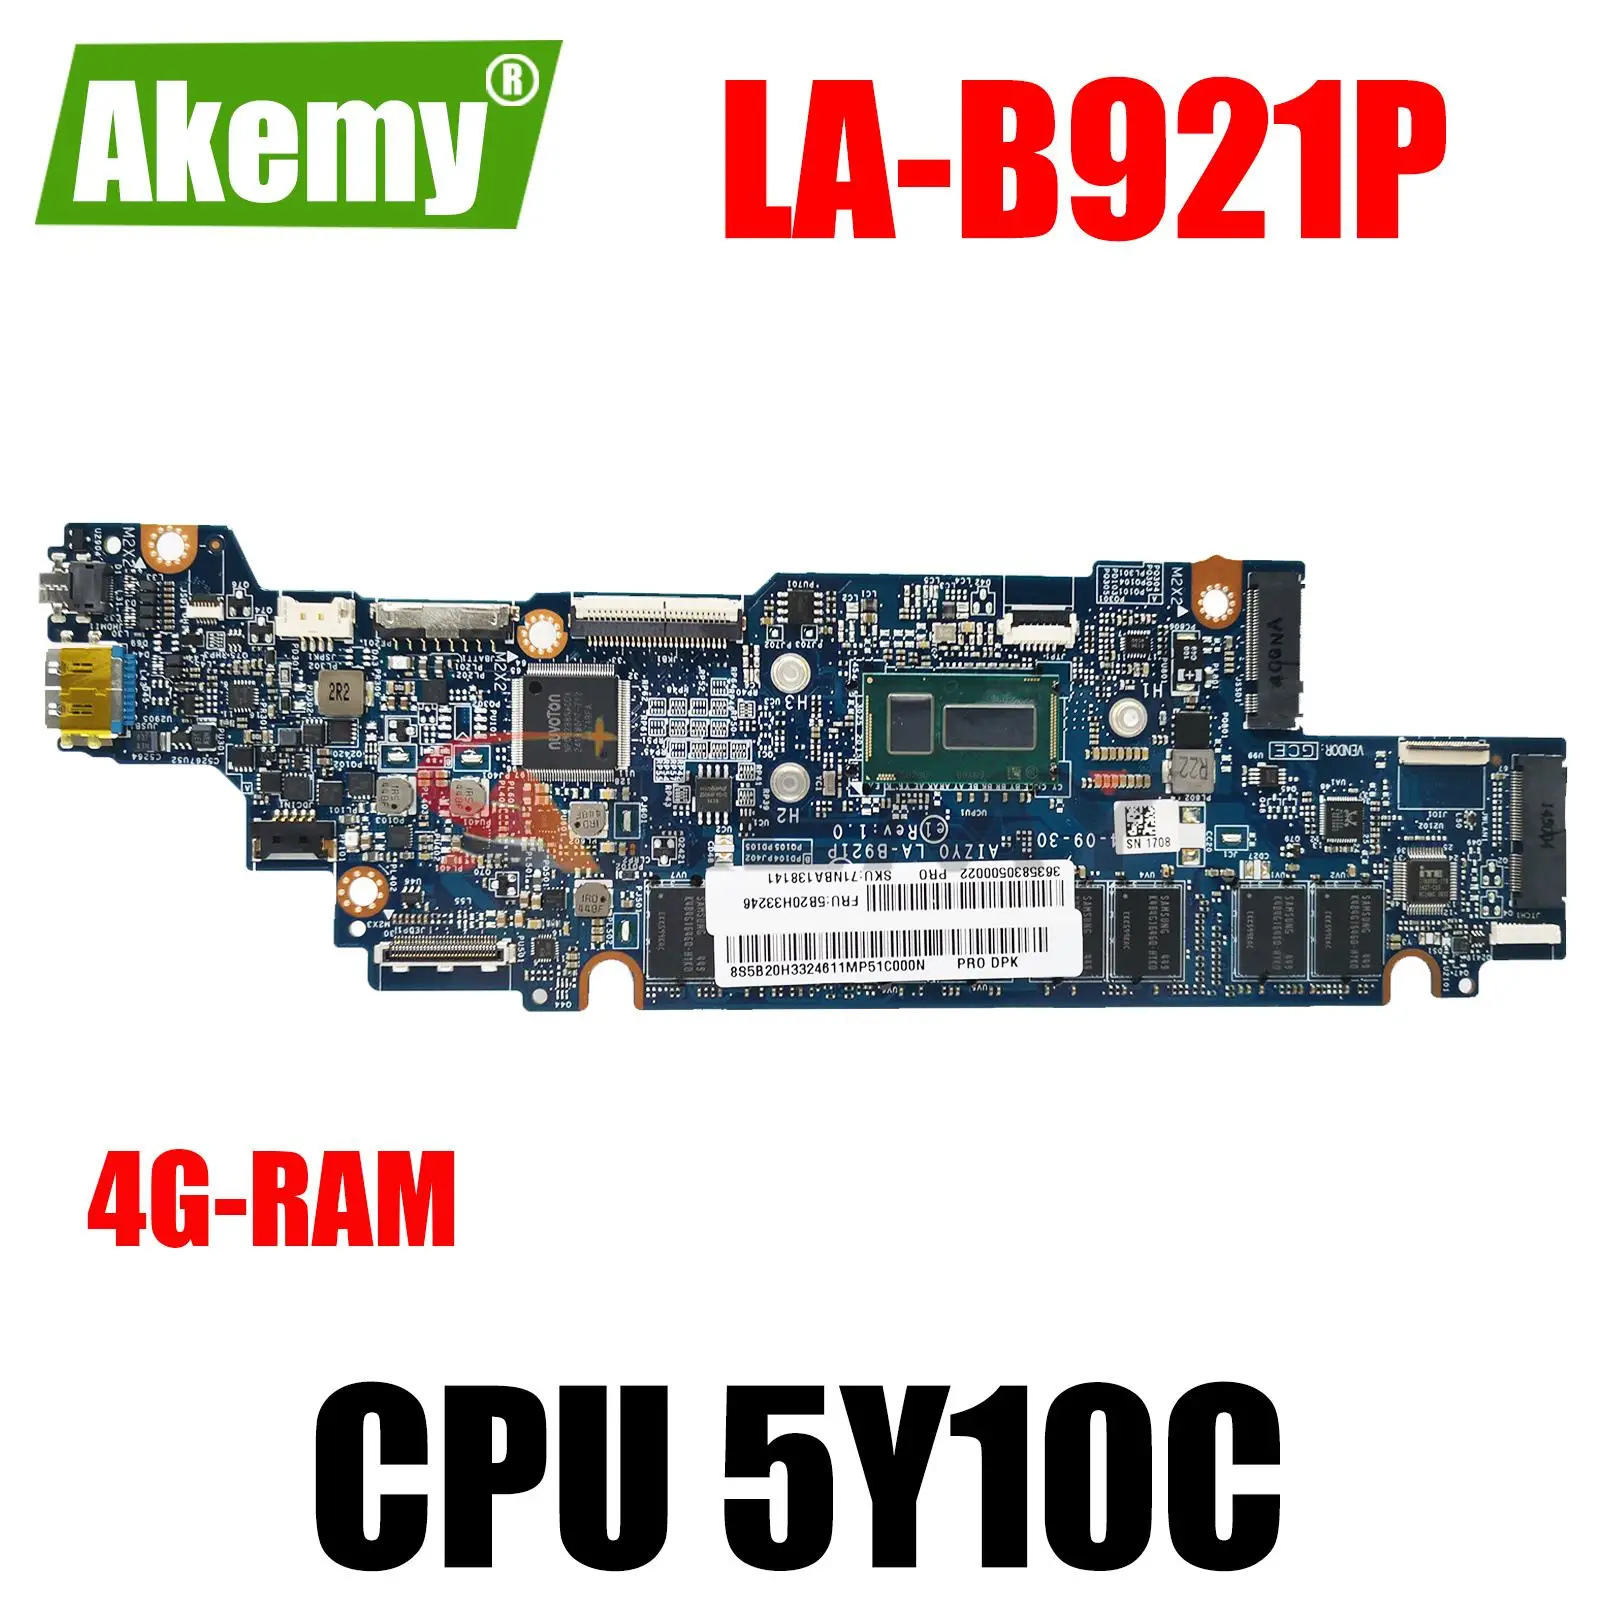 

AIZY0 LA-B921P REV:1.0 Laptop motherboard For Lenovo Yoga 3-1170 Yoga 3 11 mainboard With 4G-RAM 5Y10C CPU 100% fully Tested